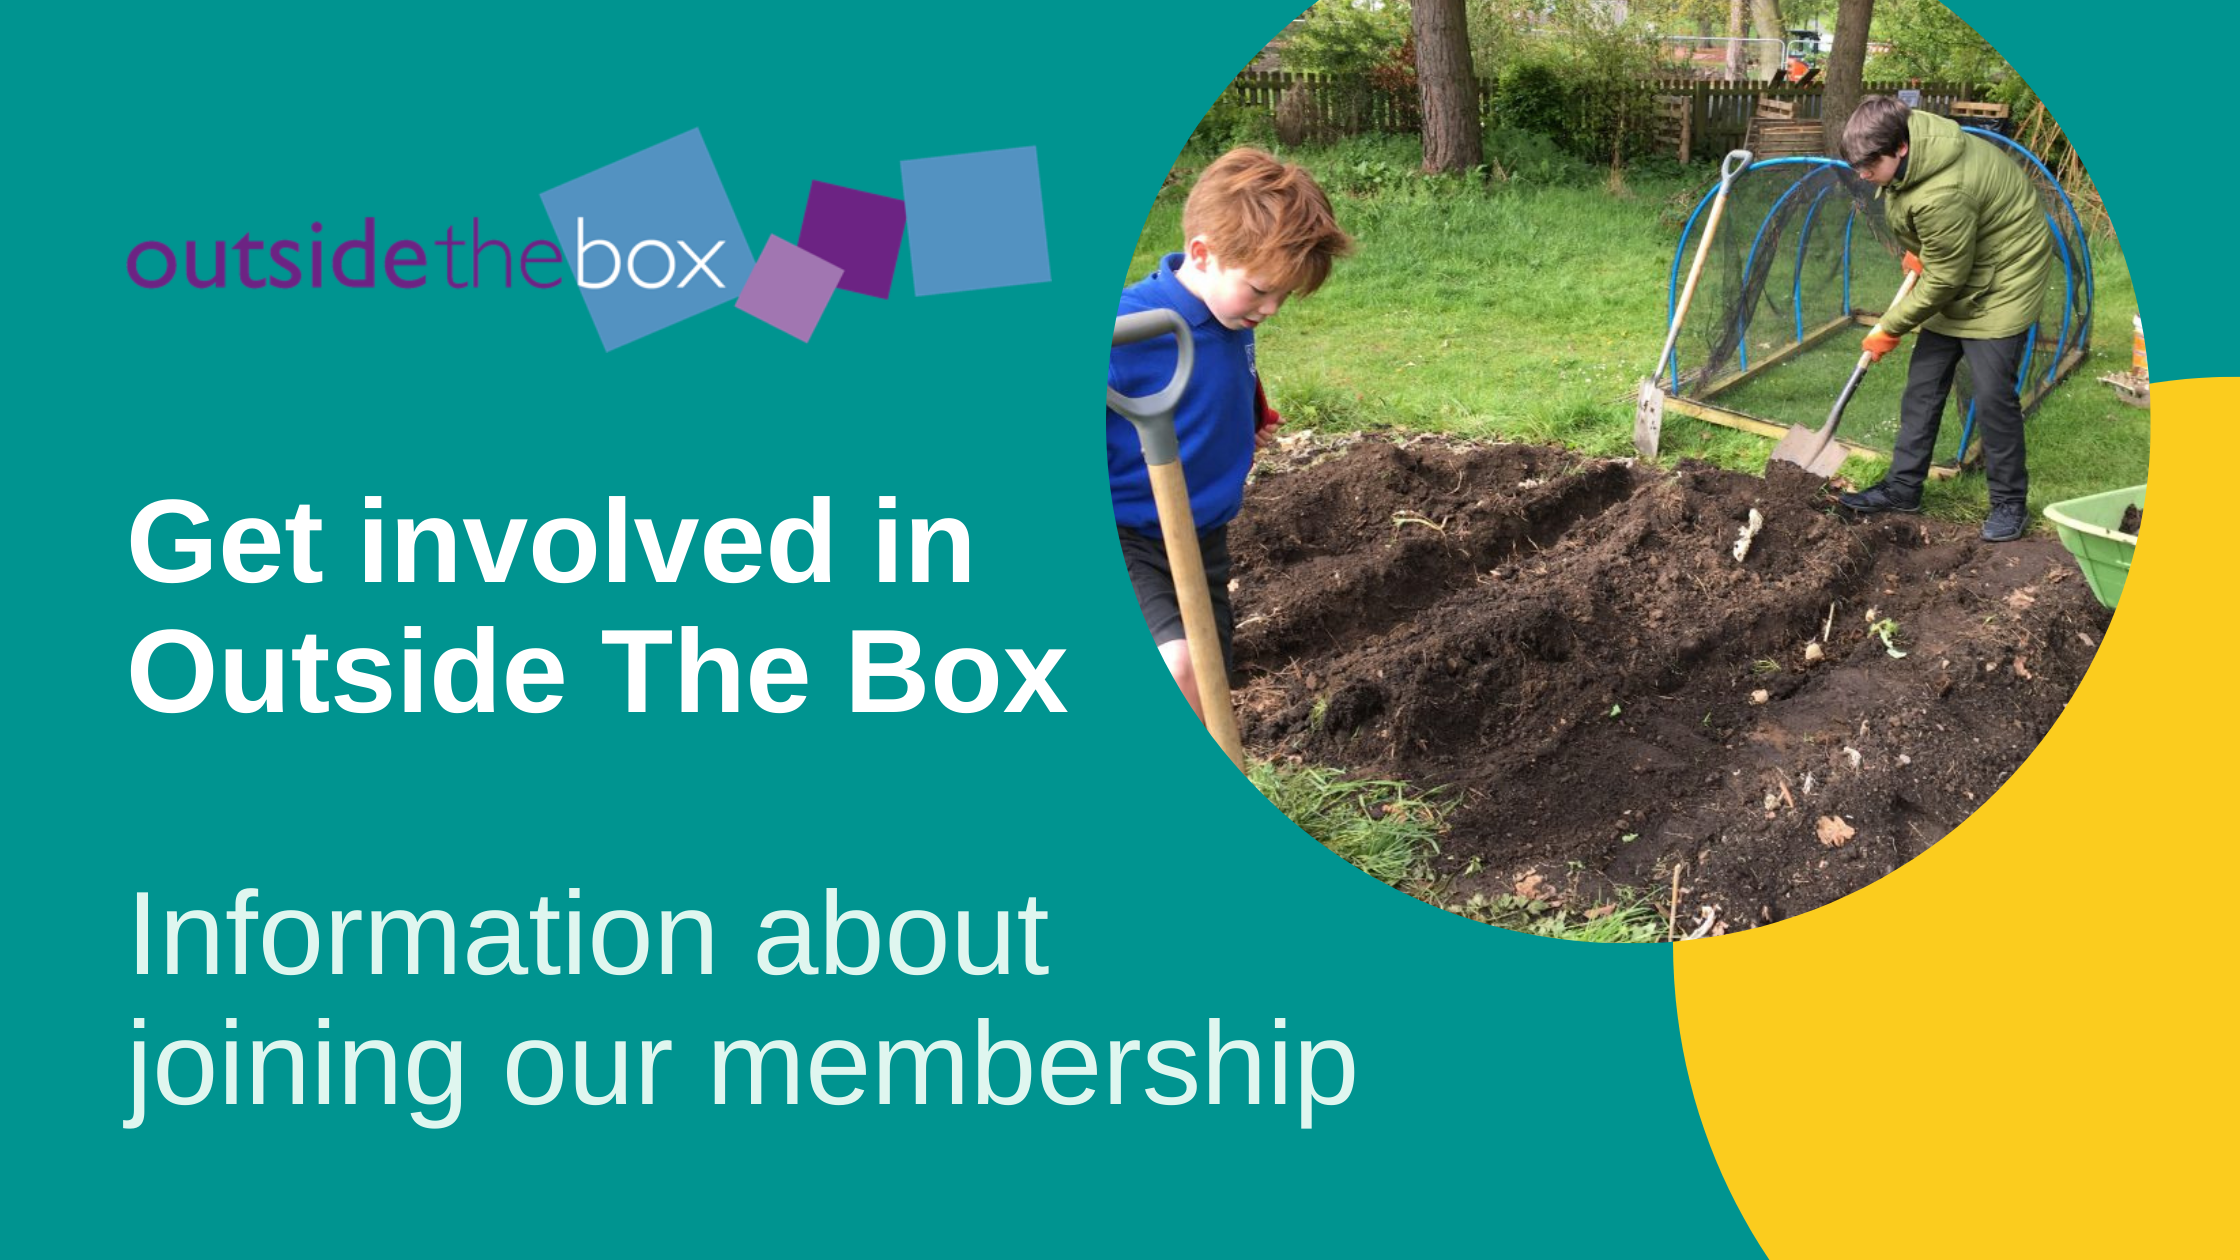 Get involved in Outside the Box. Information about joining our membership. Outside the box logo and photo of a multi-generational gardening group